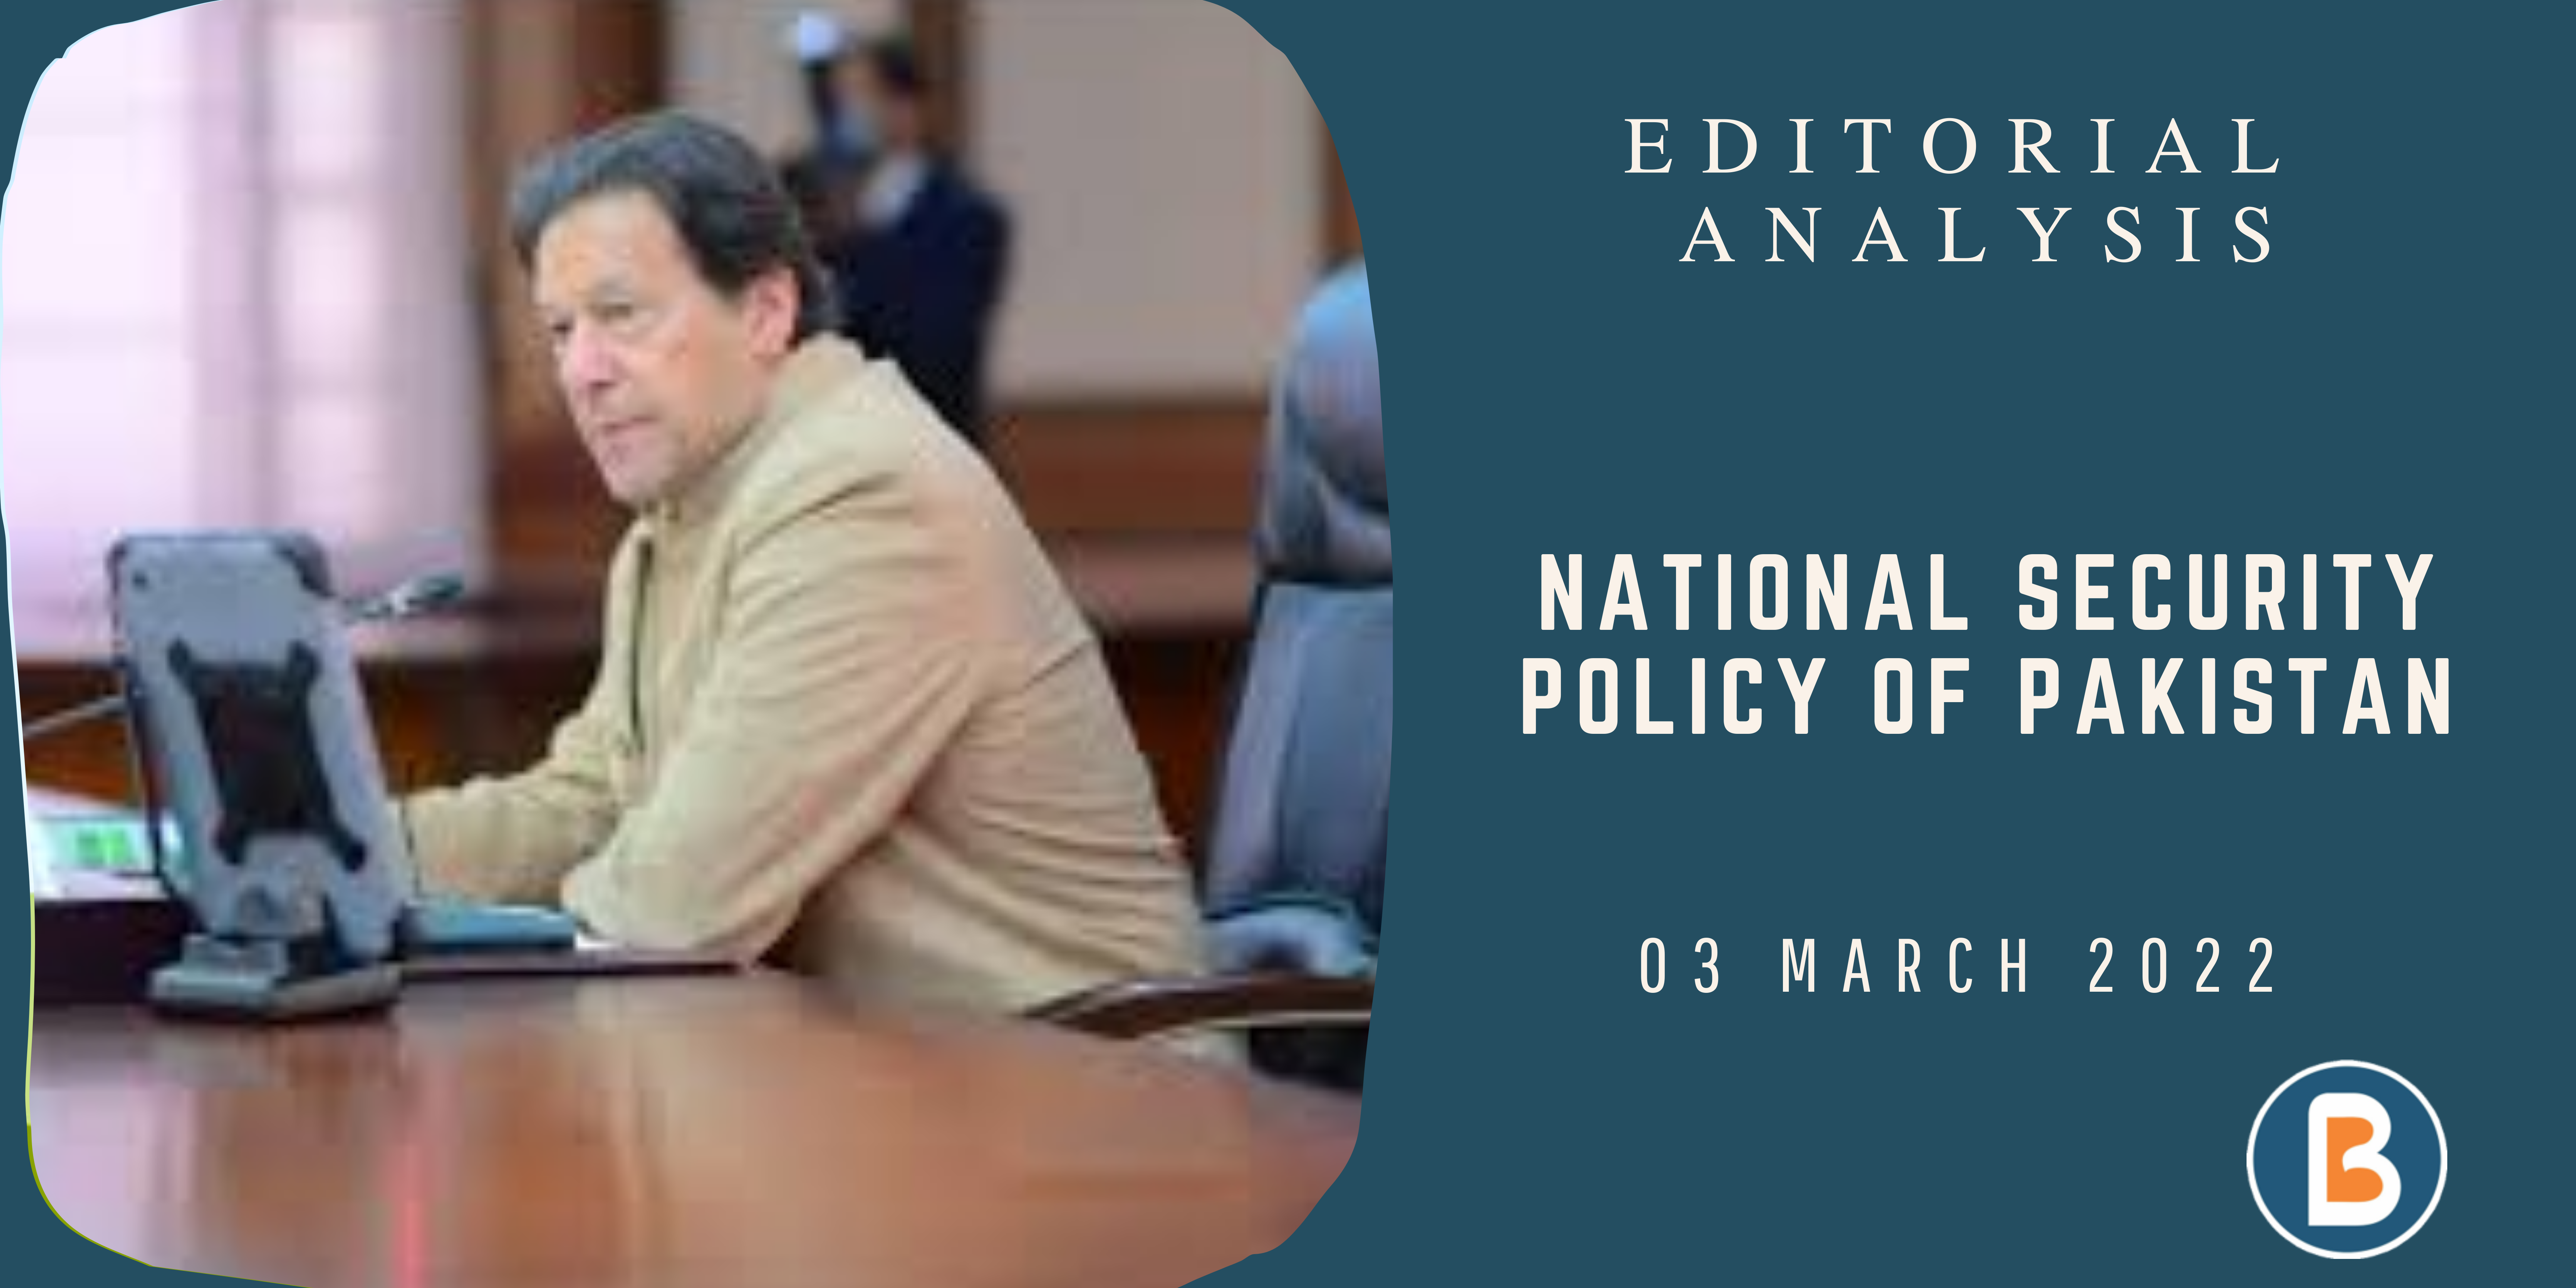 Editorial Analysis for UPSC - National Security Policy of Pakistan